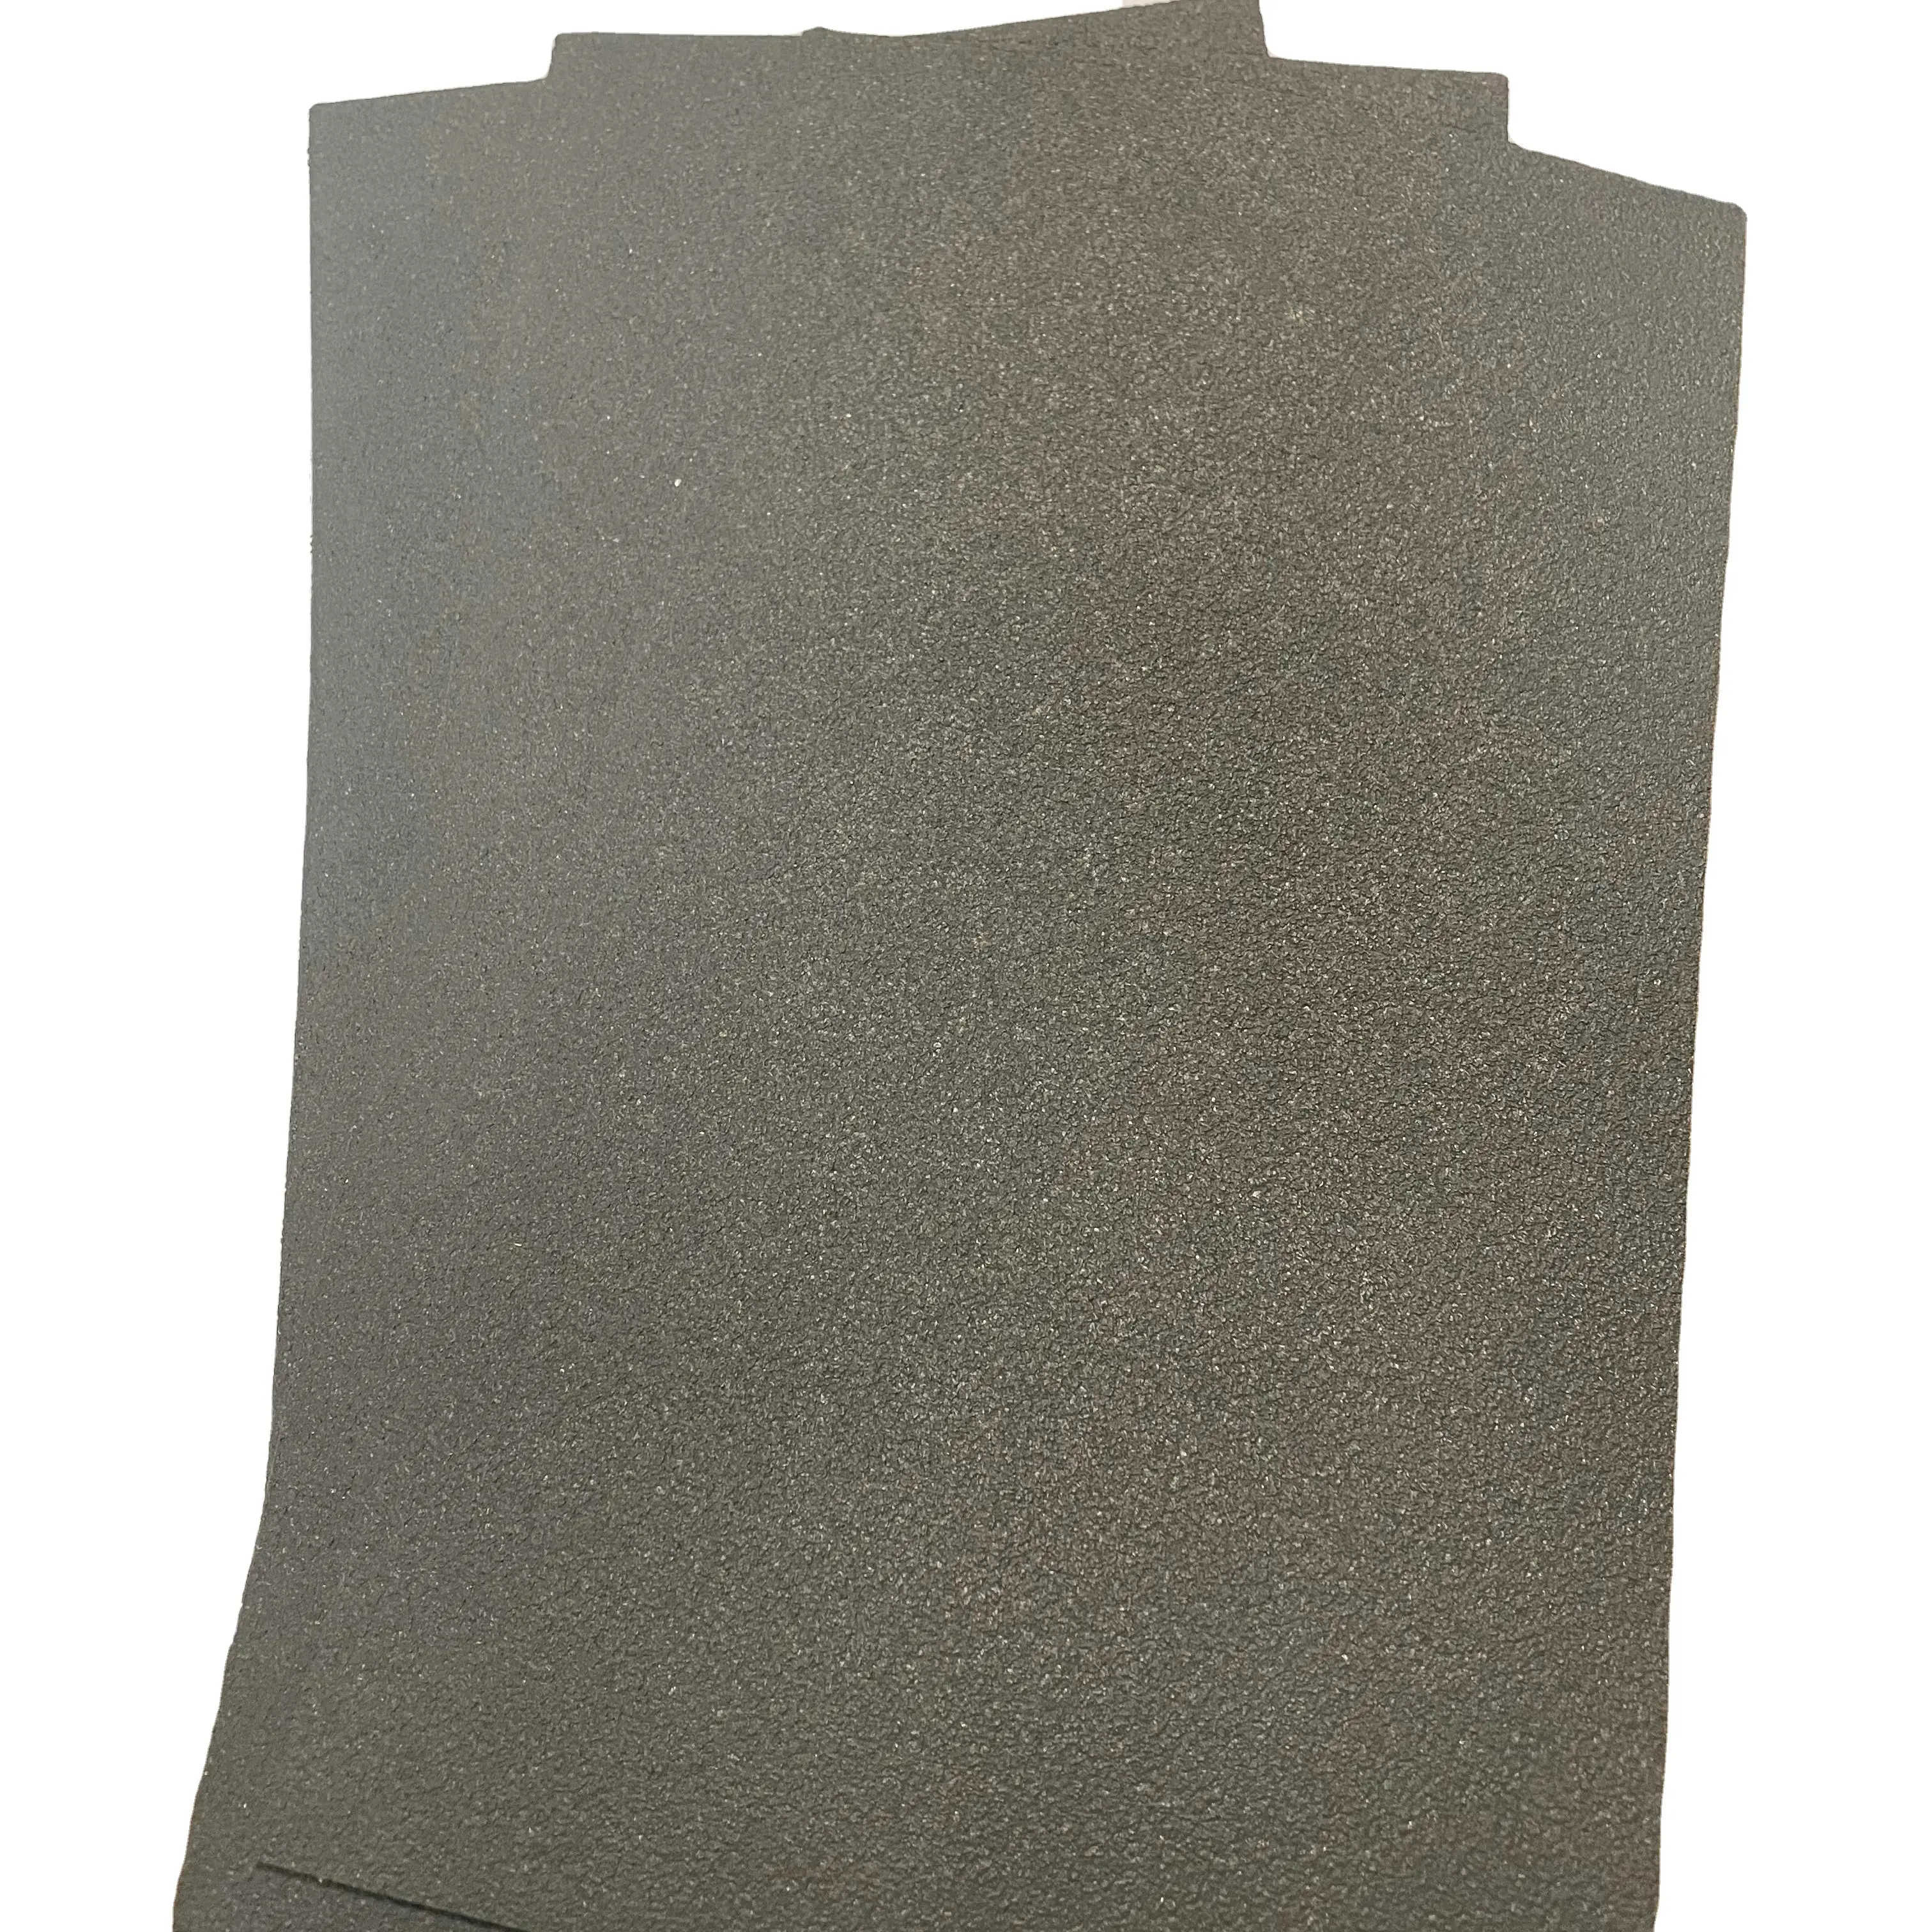 Fibre-reinforced Version TPO Roofing Membrane for Low Slope Roof